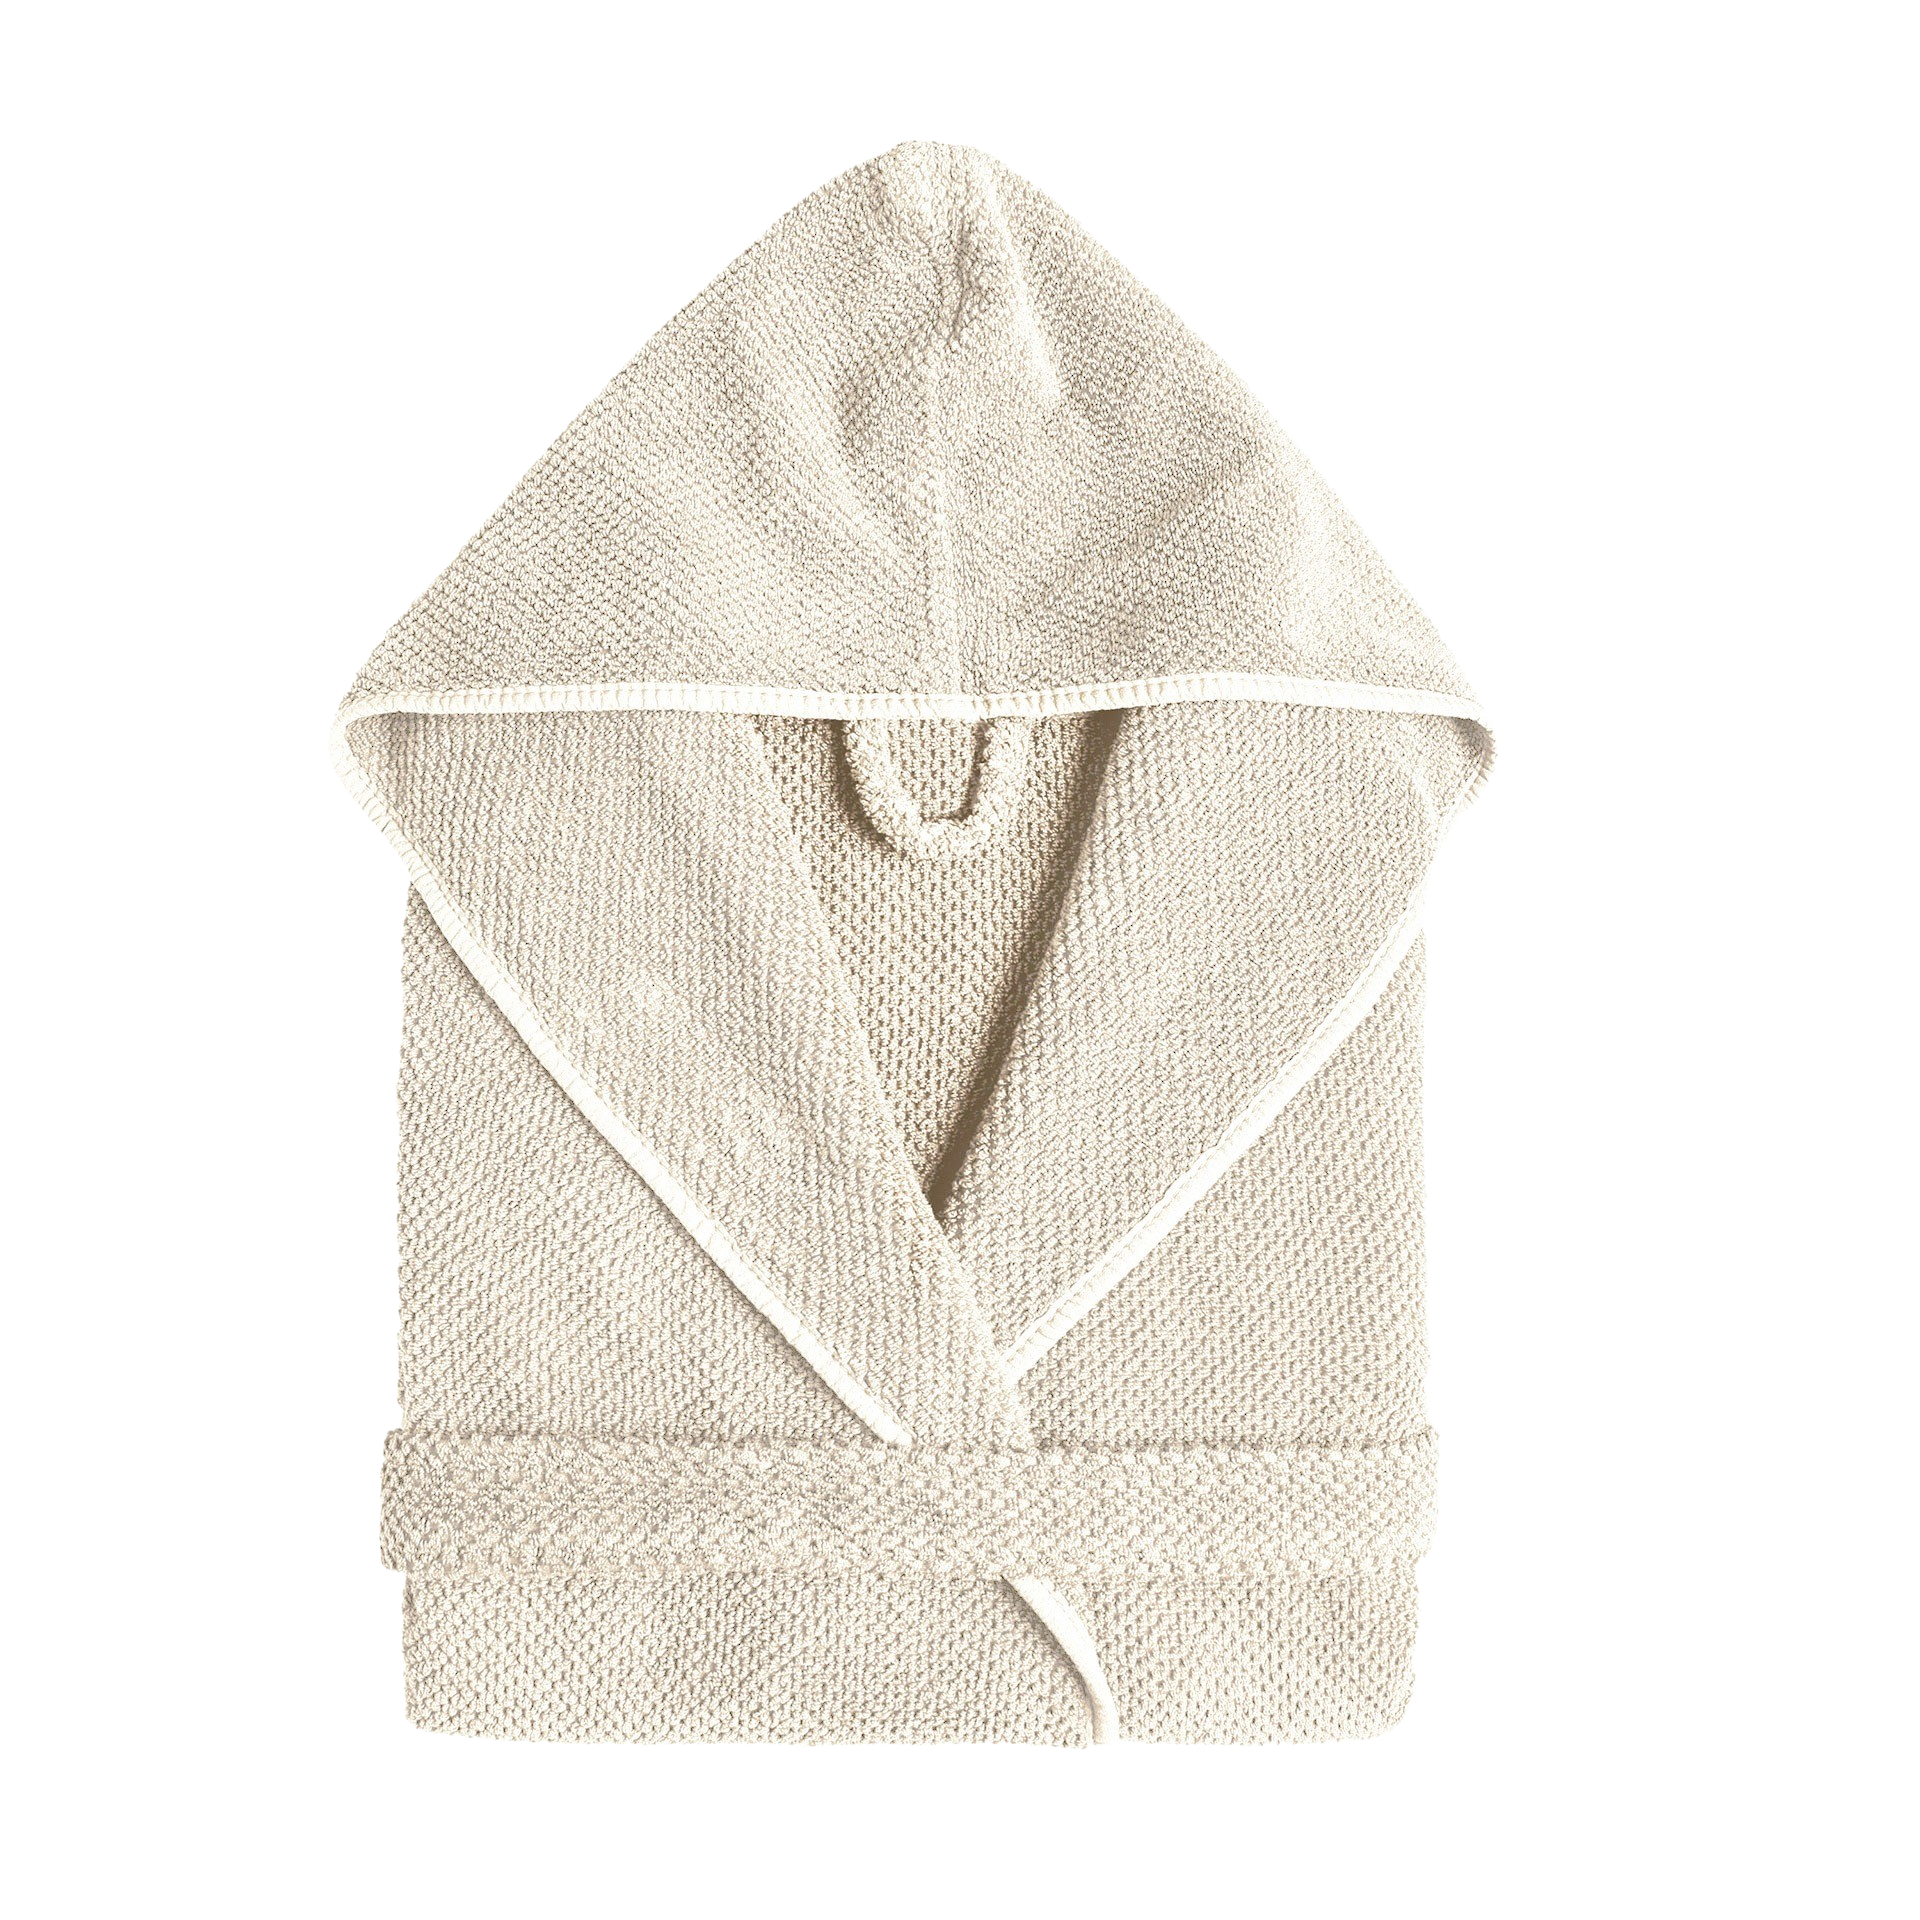 Graccioza Bee Waffle Towels - Silver - Available in 9 Sizes